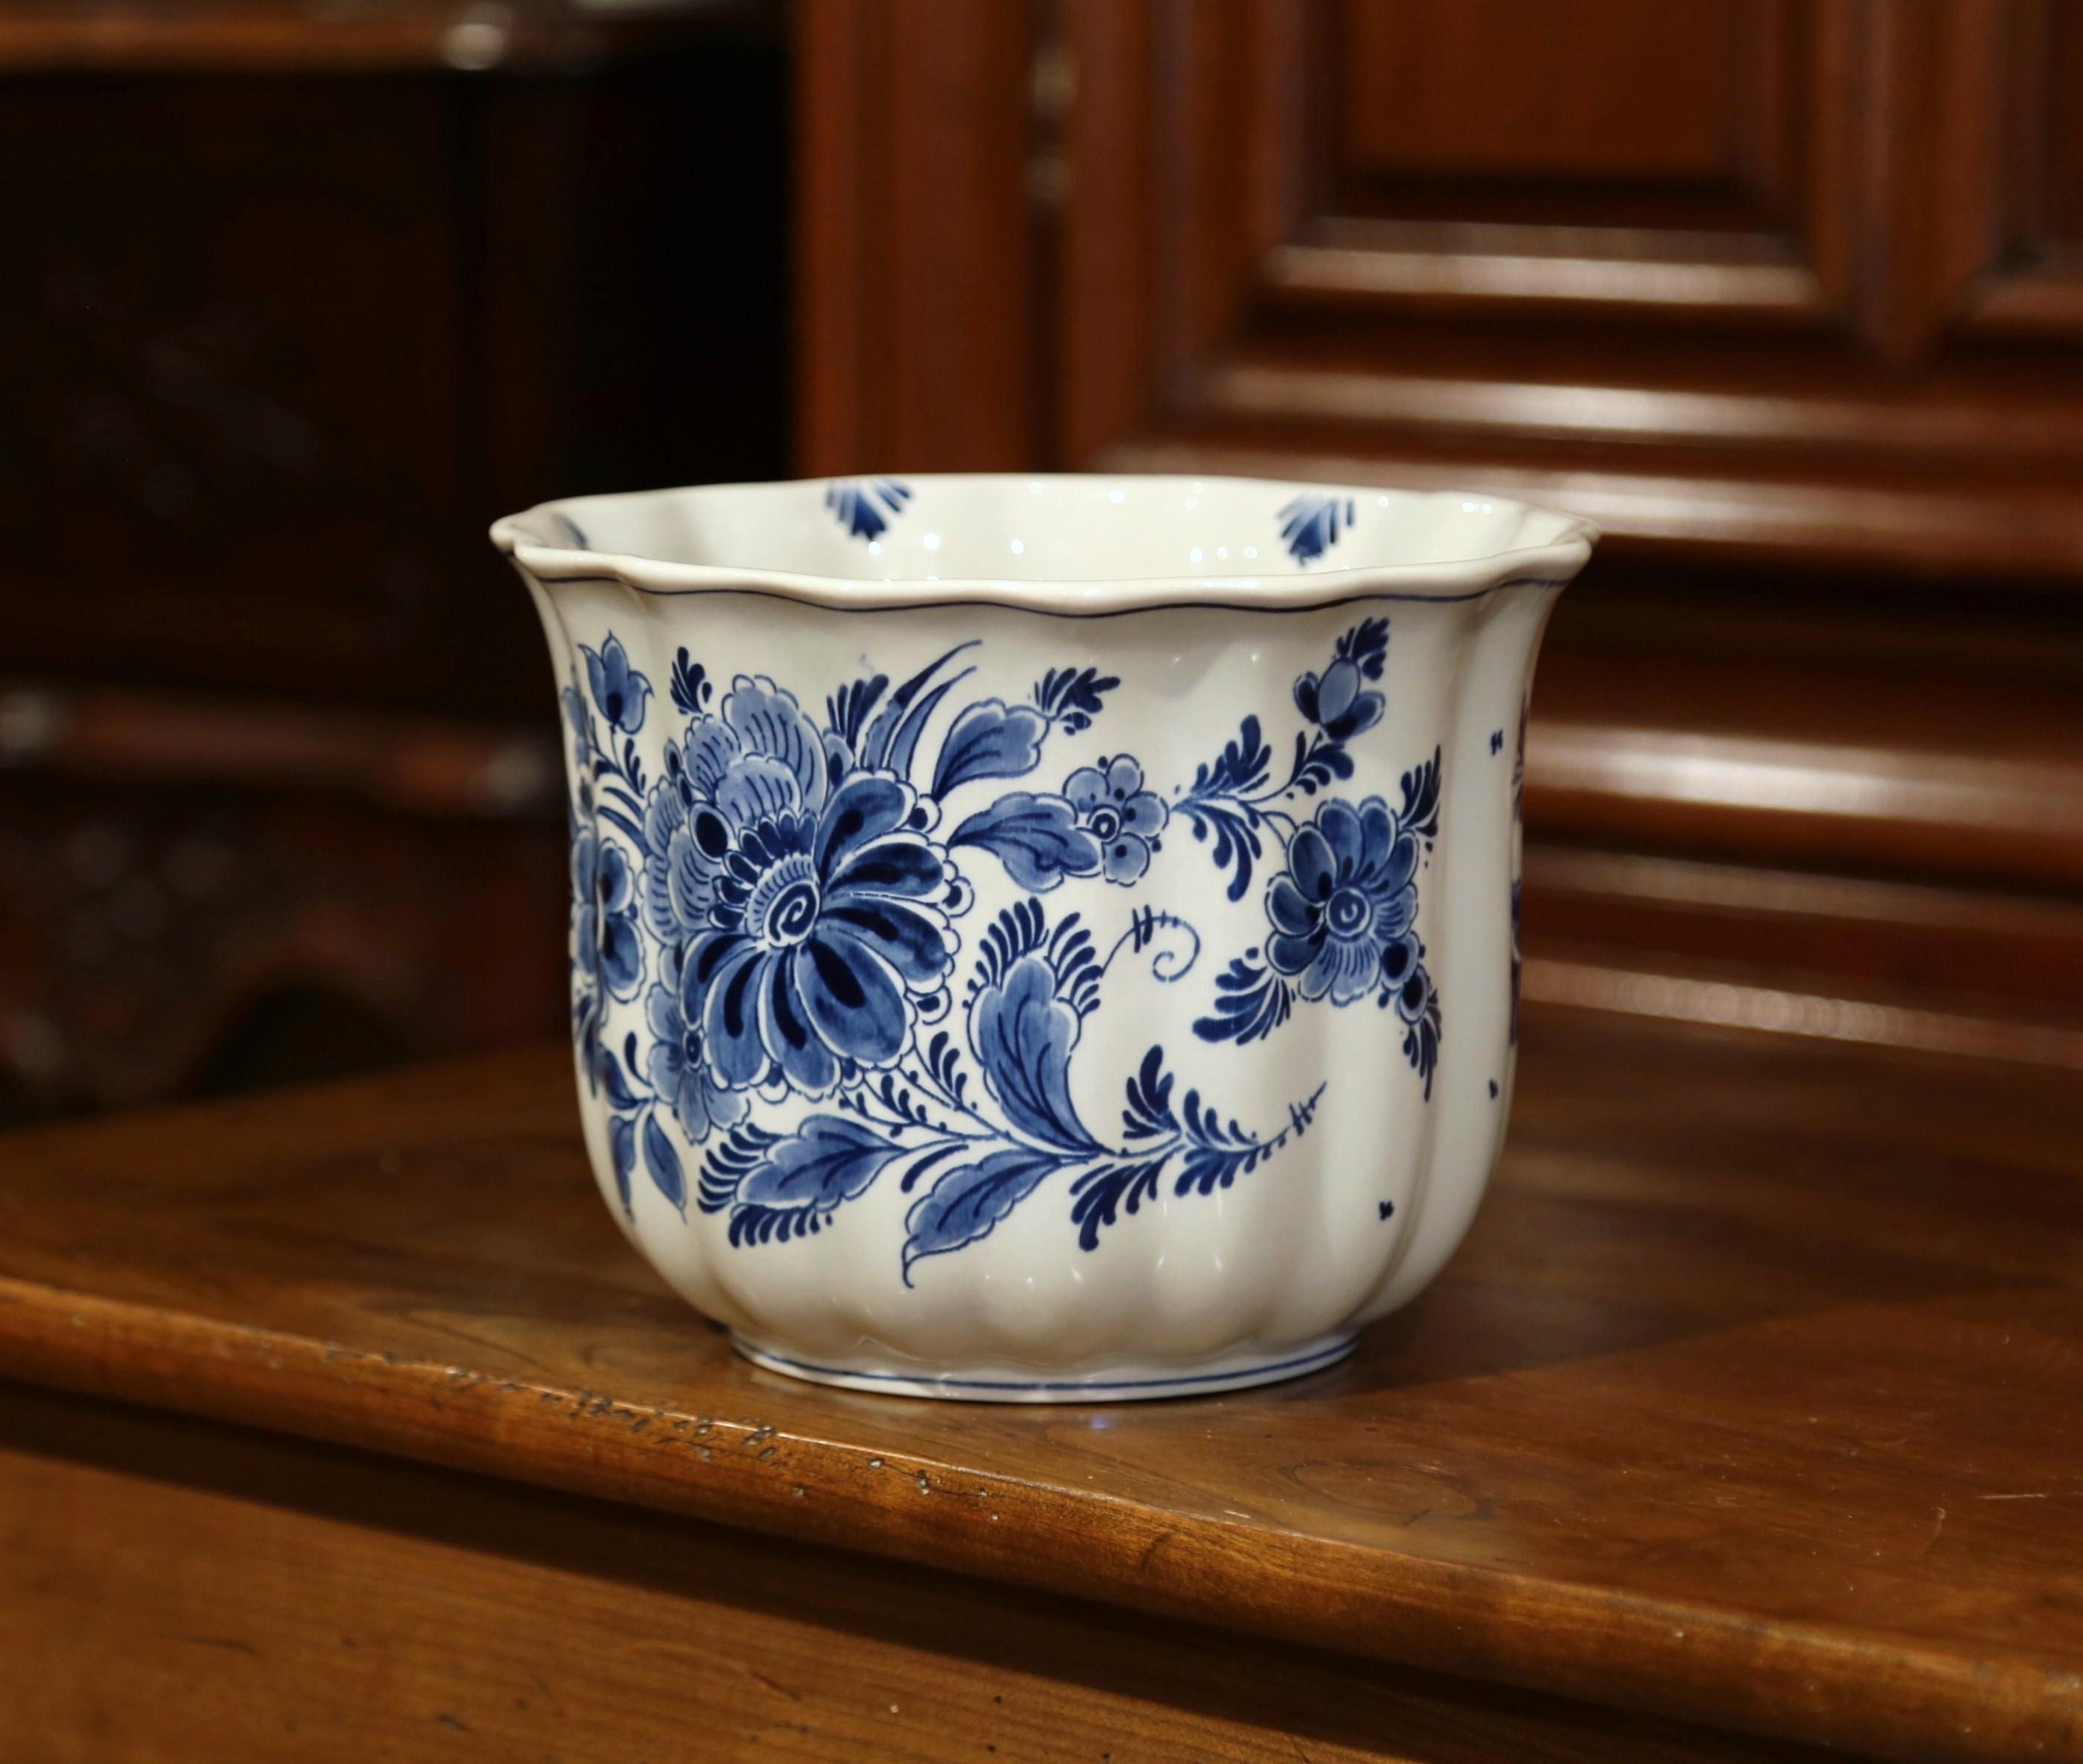 Handcrafted and hand-painted in Holland circa 1970, the round faience planter features floral decor in the traditional blue and white palette. The ceramic cache pot is signed on the bottom 